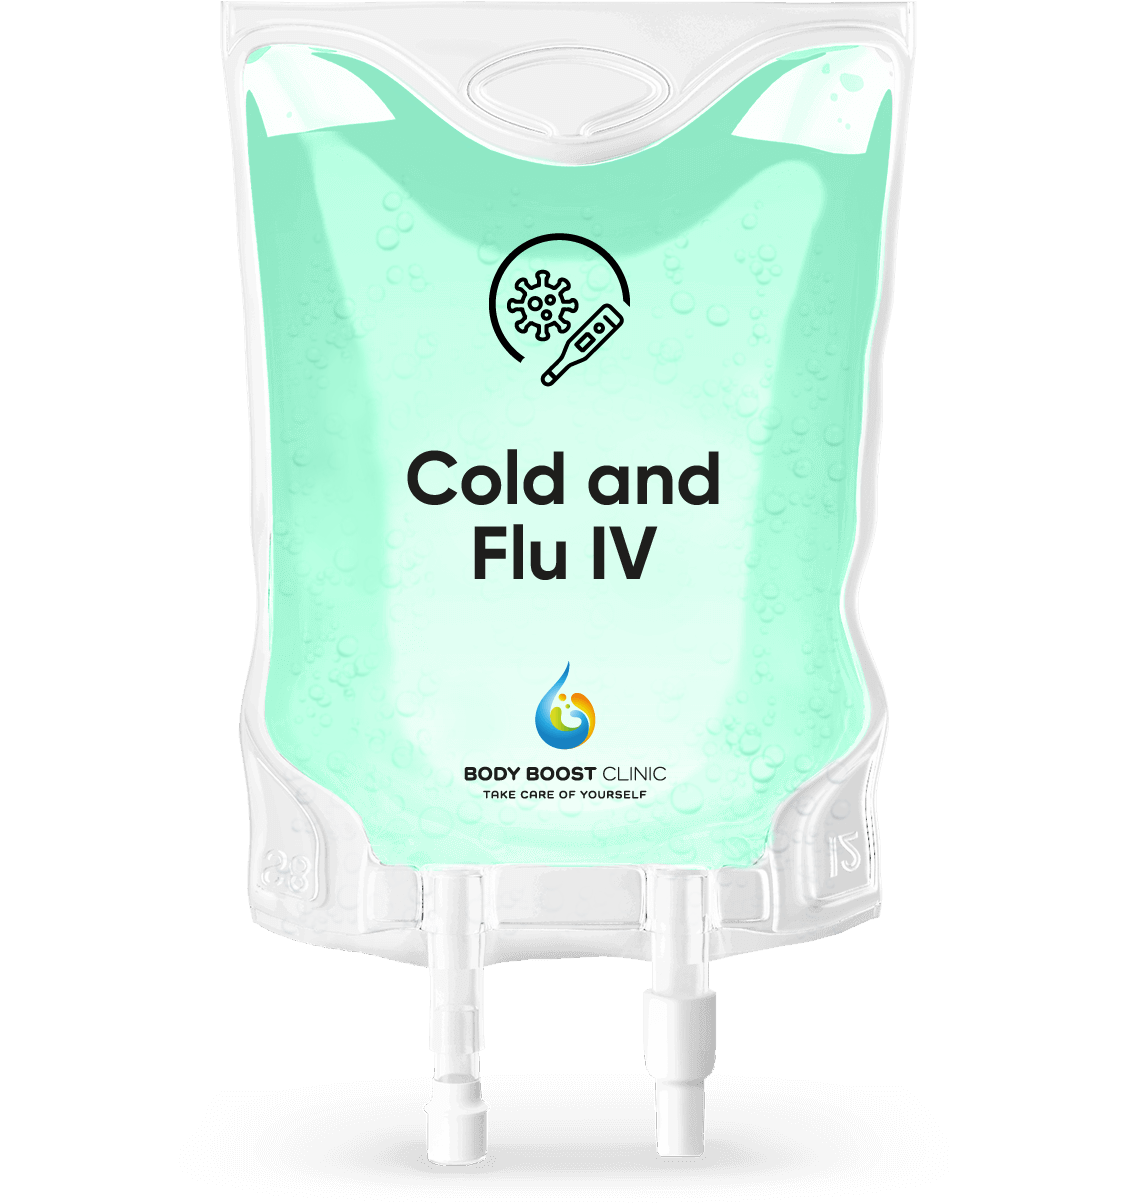 Body Boost Clinic Hull - Vitamin IV drip treat Cold and Flu for health and beauty